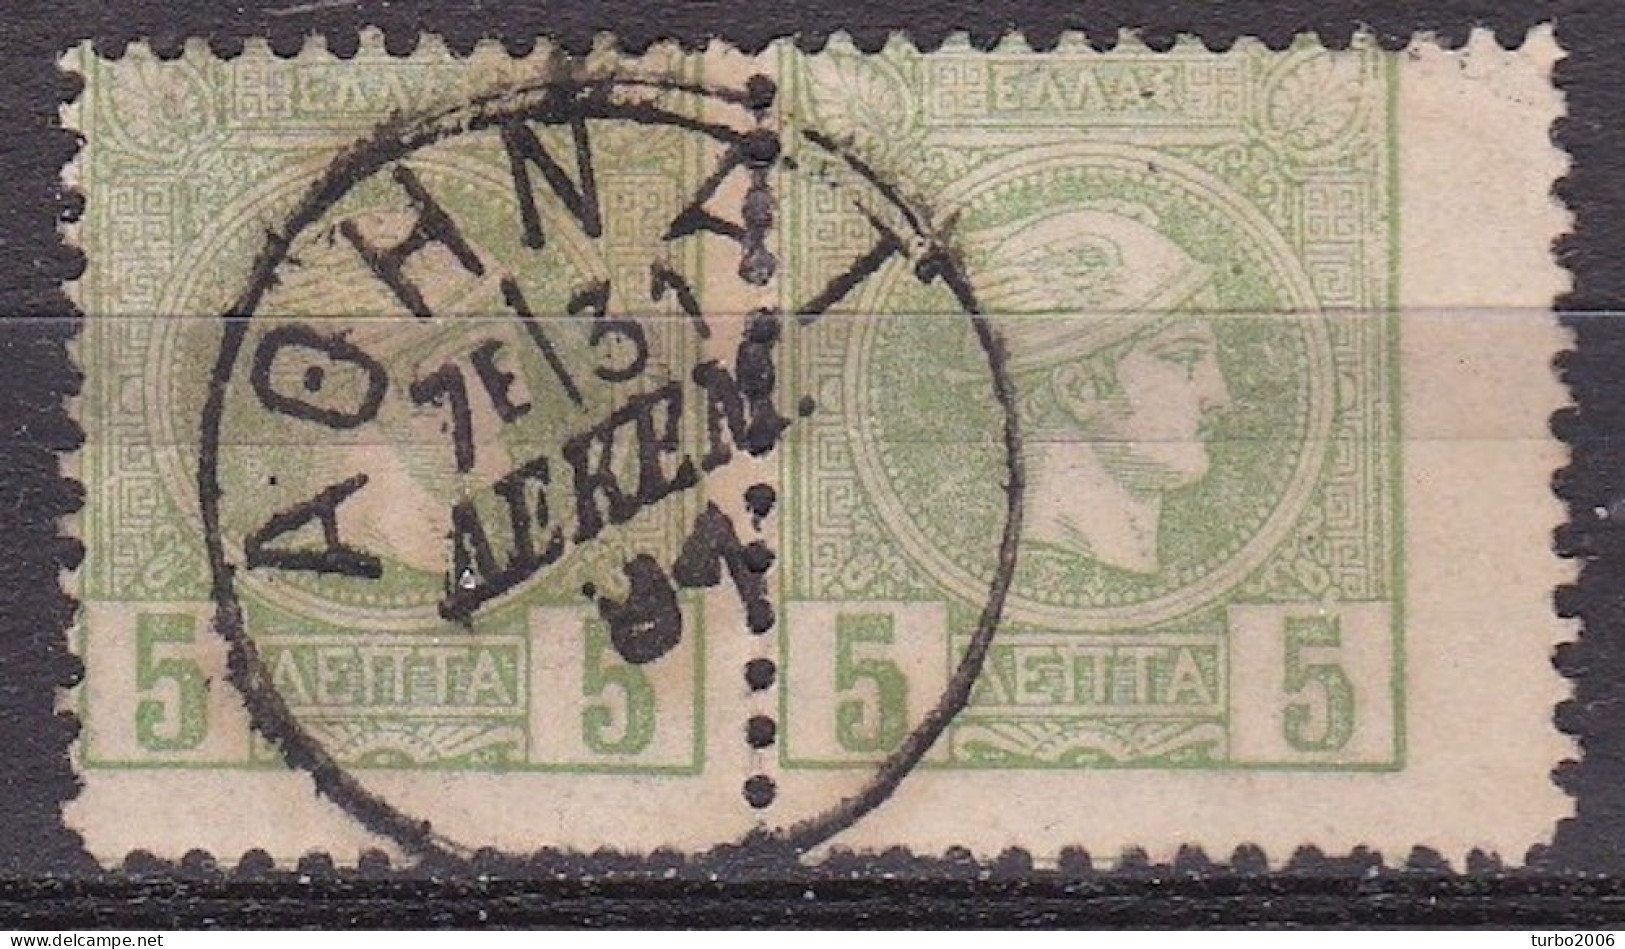 GREECE 1891-96 Small Hermes Head 5 L Pale Green Athens Issue Perforated 11½ Pair Small / Large Margin Vl. 109 A - Used Stamps